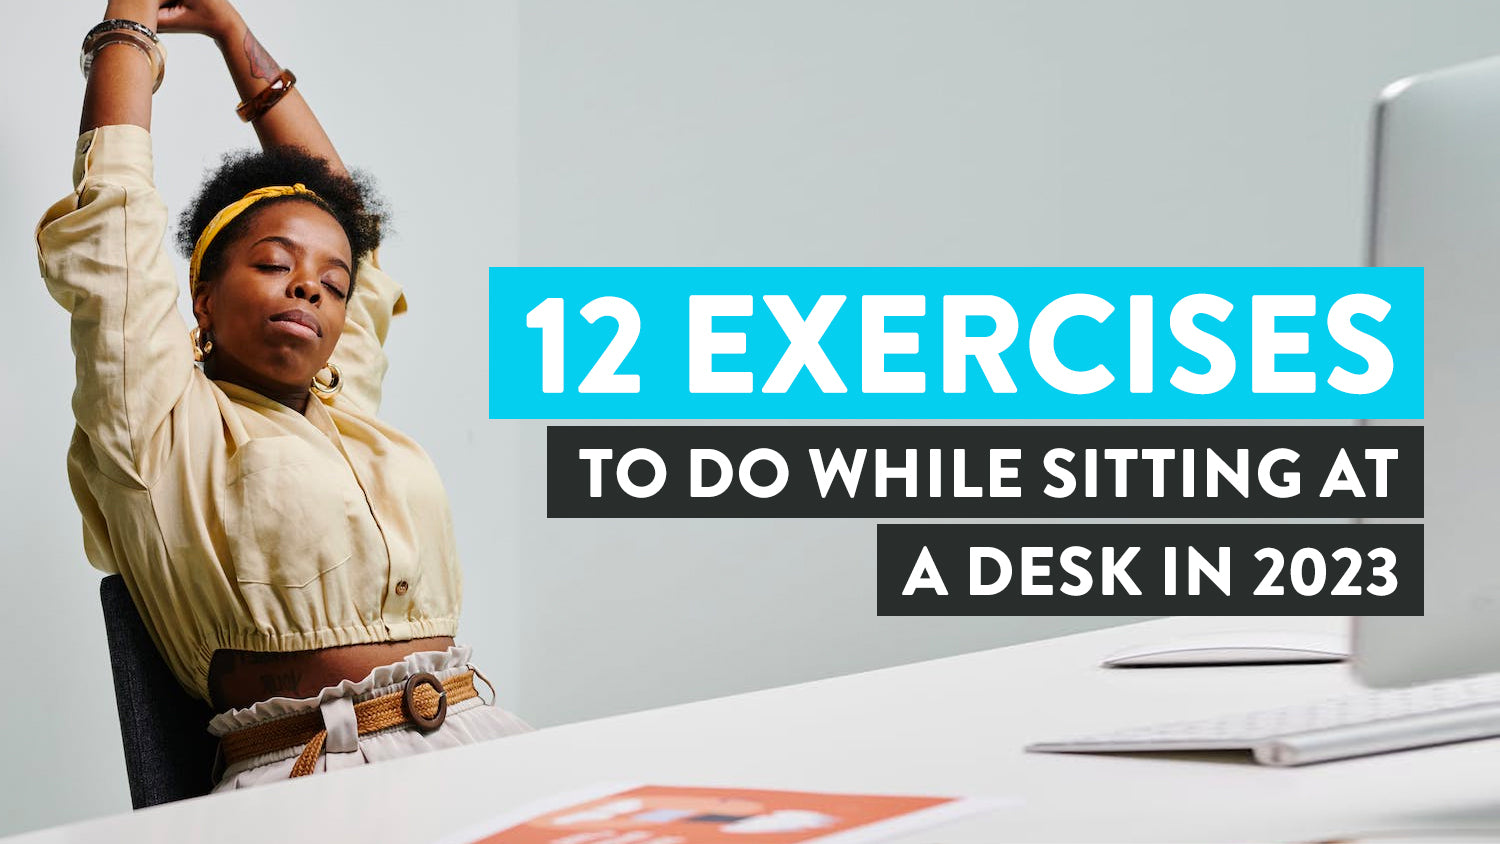 How to stay fit while working in an office: Tips, hacks, and